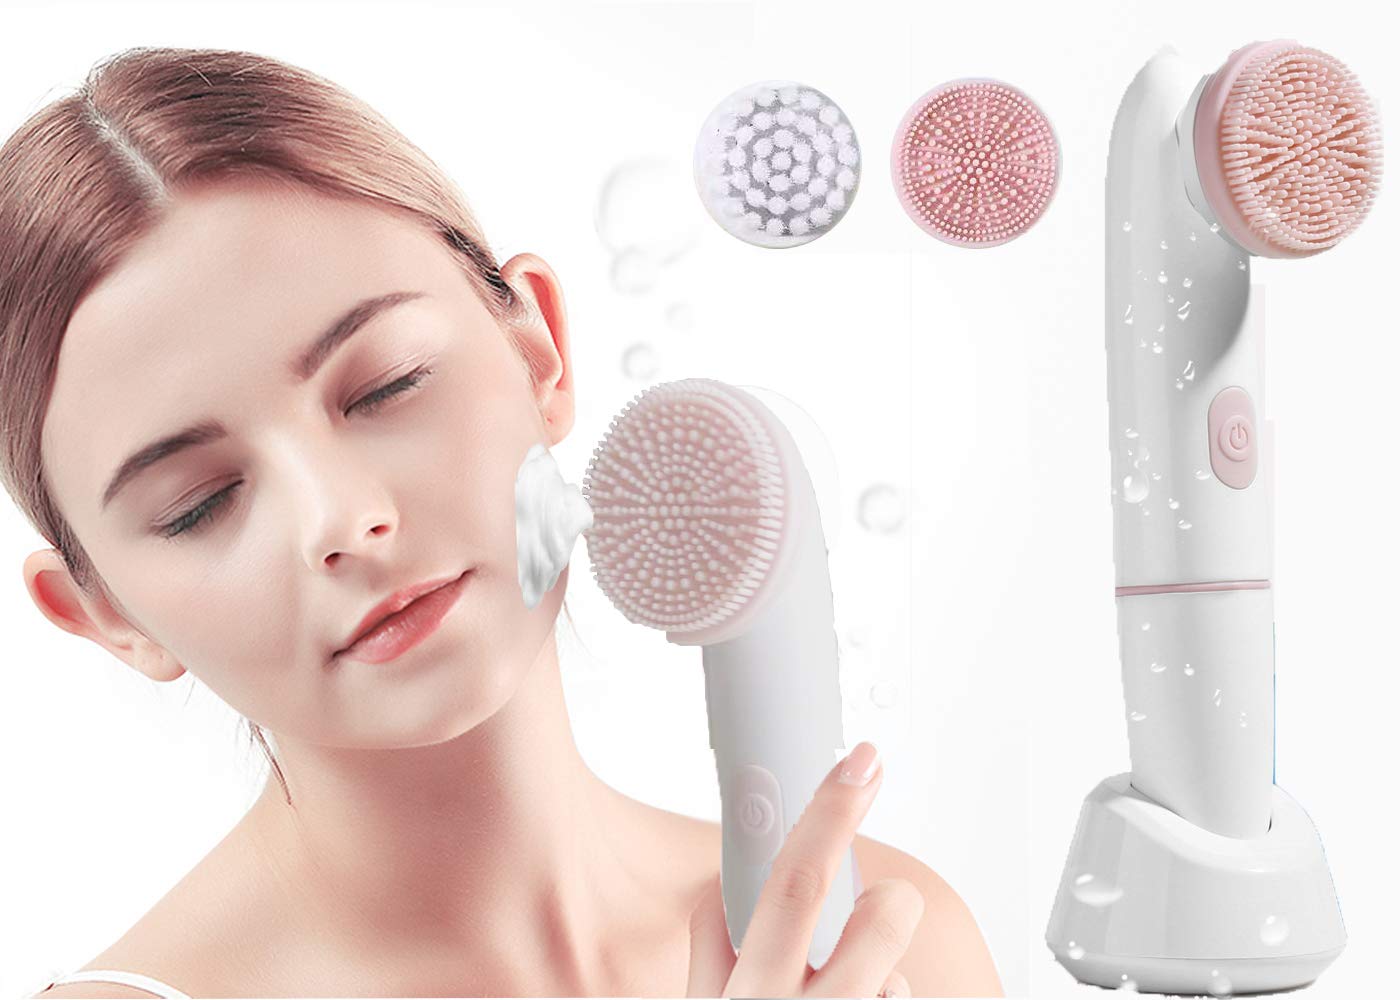 Deep Cleaning Ultrasonic Vibration Waterproof Facial Cleansing Brush